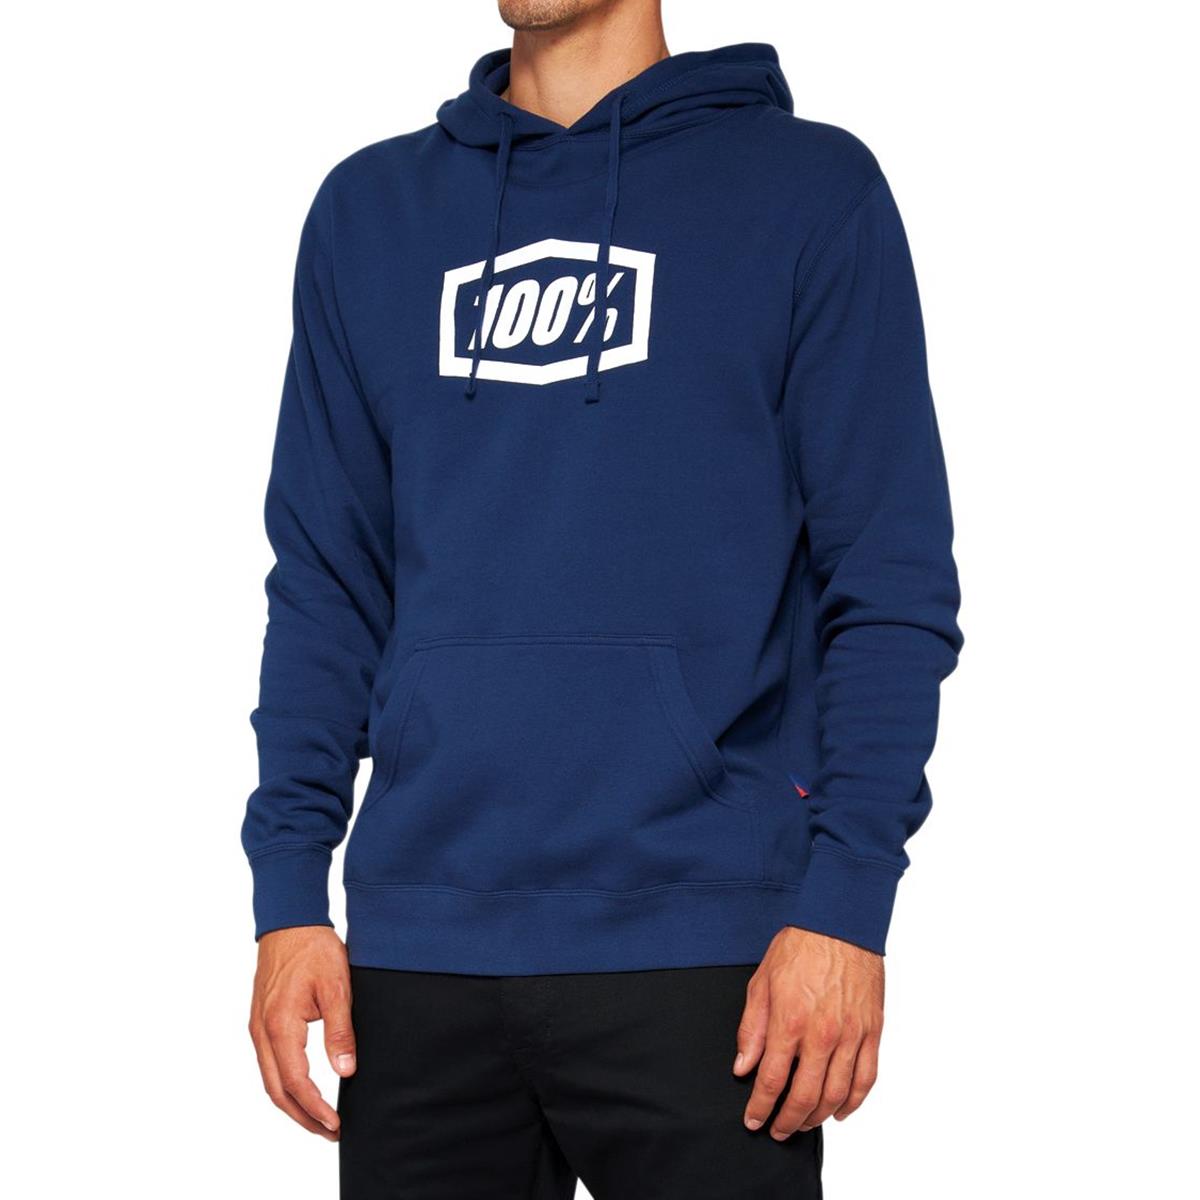 100% Hoodie Icon Navy